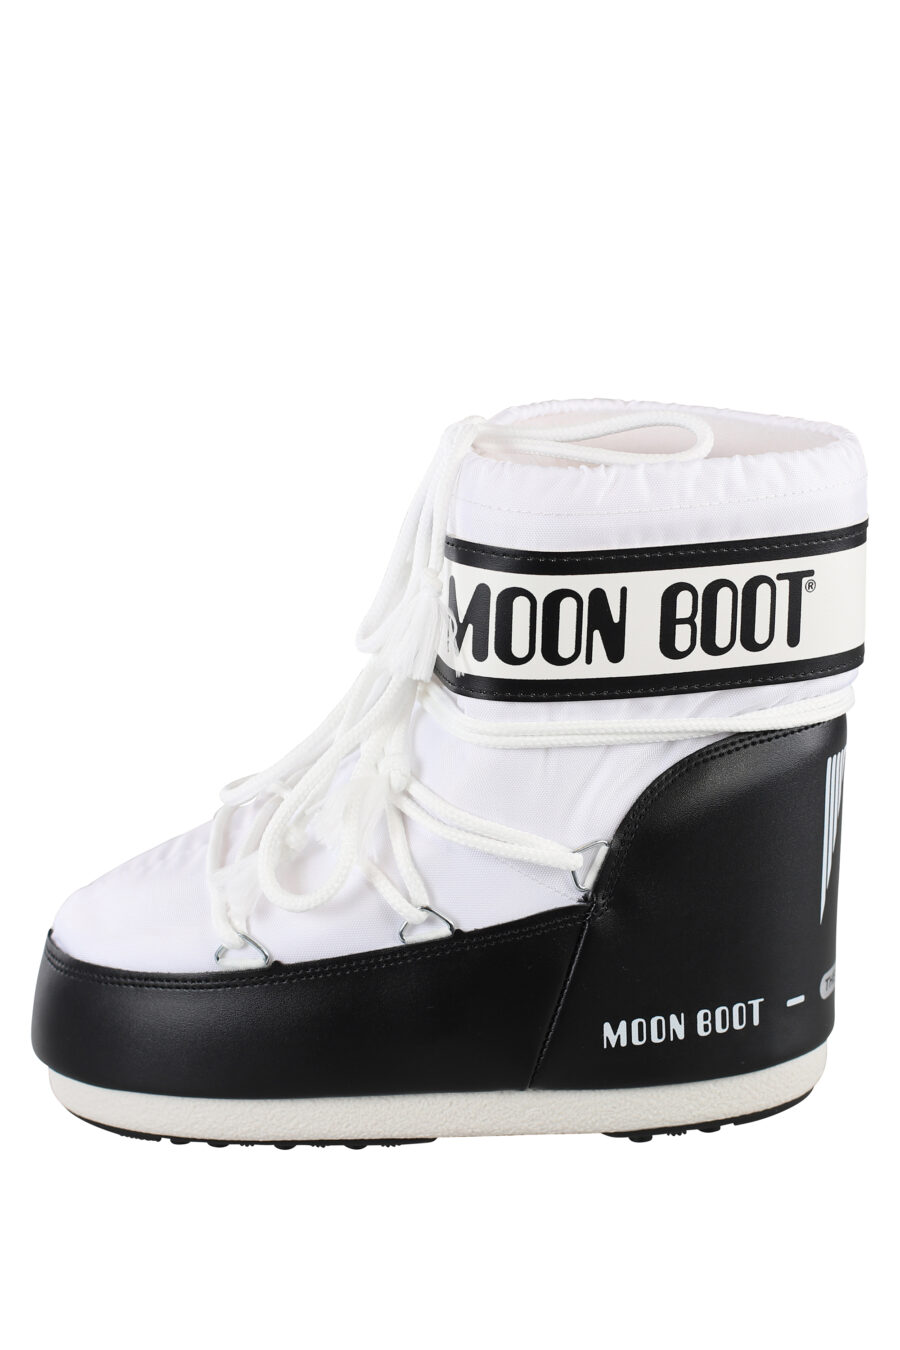 Two-tone black and white snow boots with black logo - IMG 6743